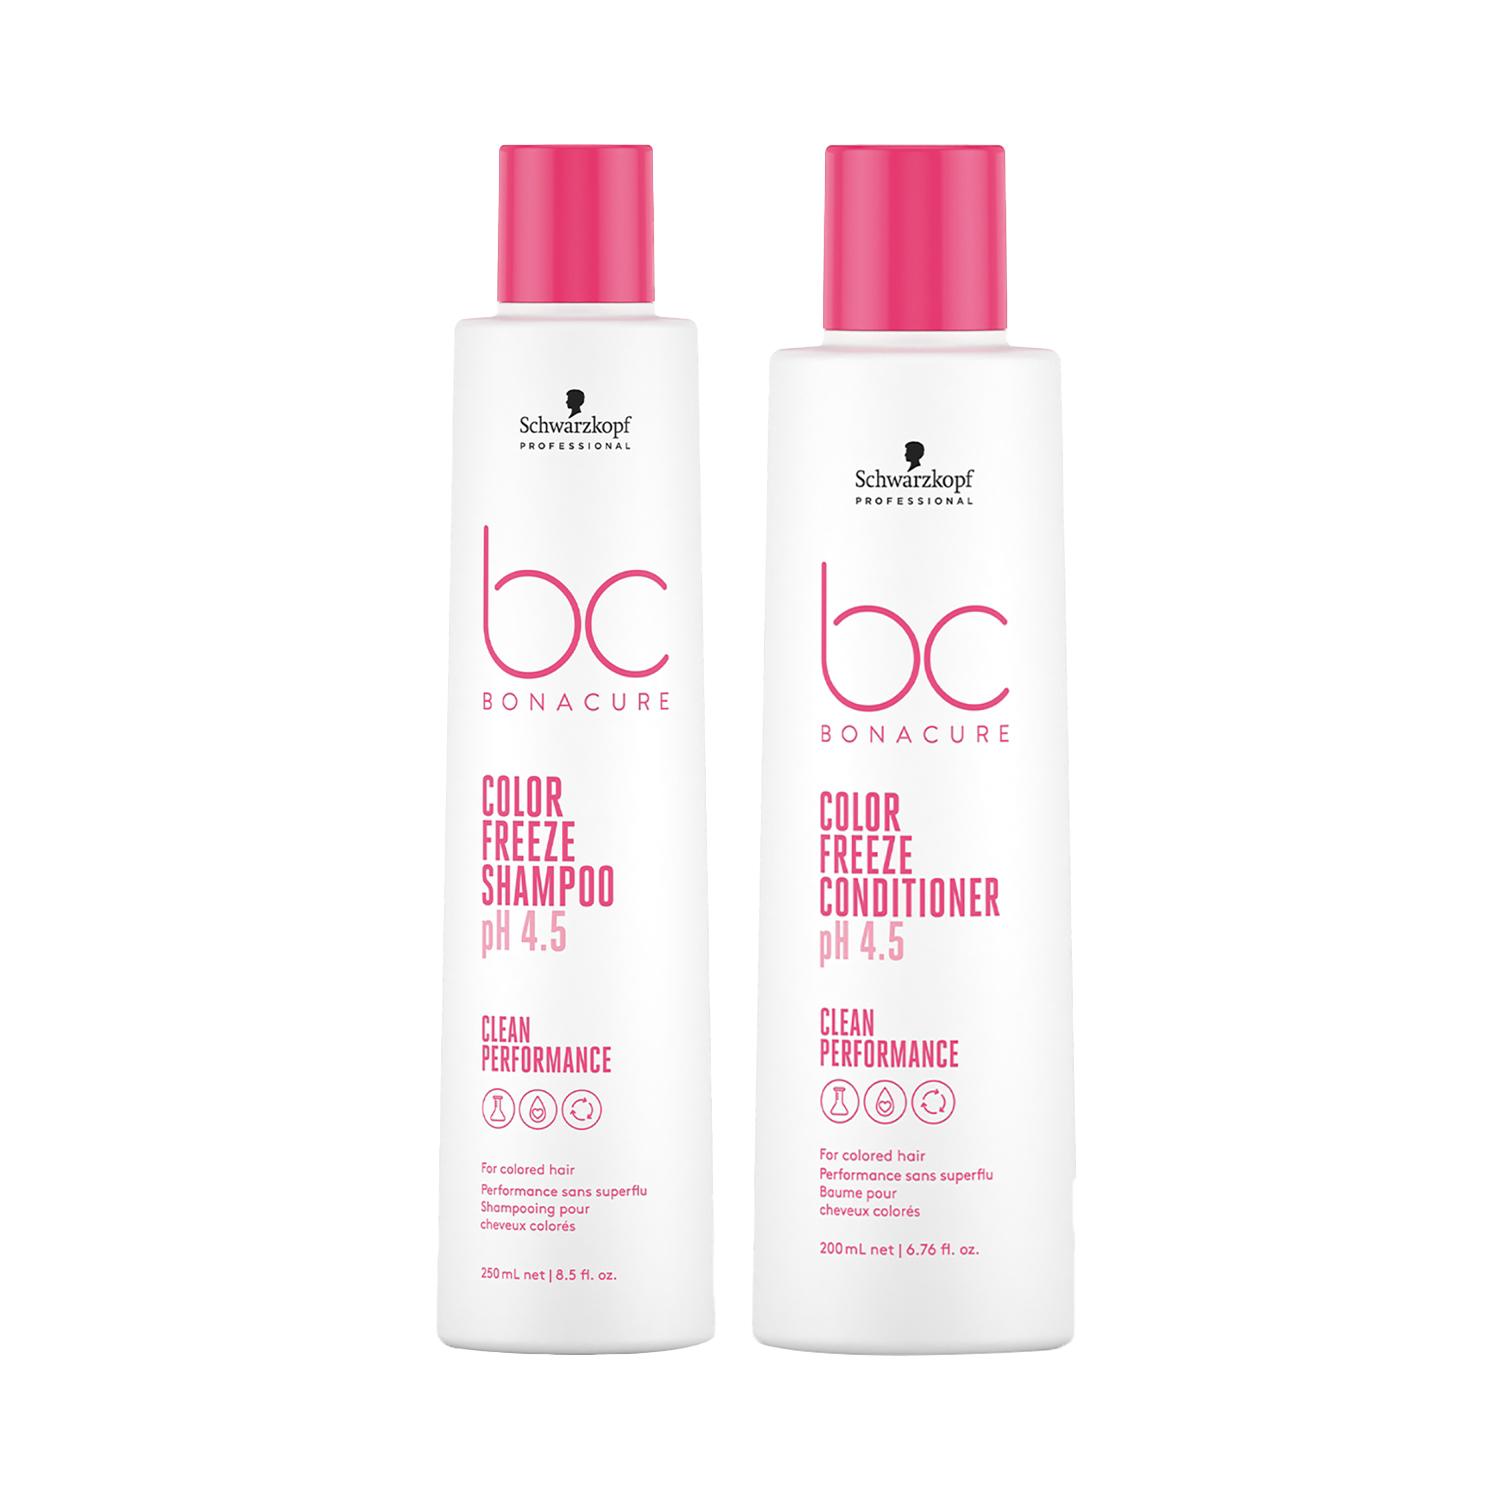 Schwarzkopf Professional | Schwarzkopf Professional Bonacure Color Freeze Shampoo (250 ml) and Conditioner (200 ml) Combo